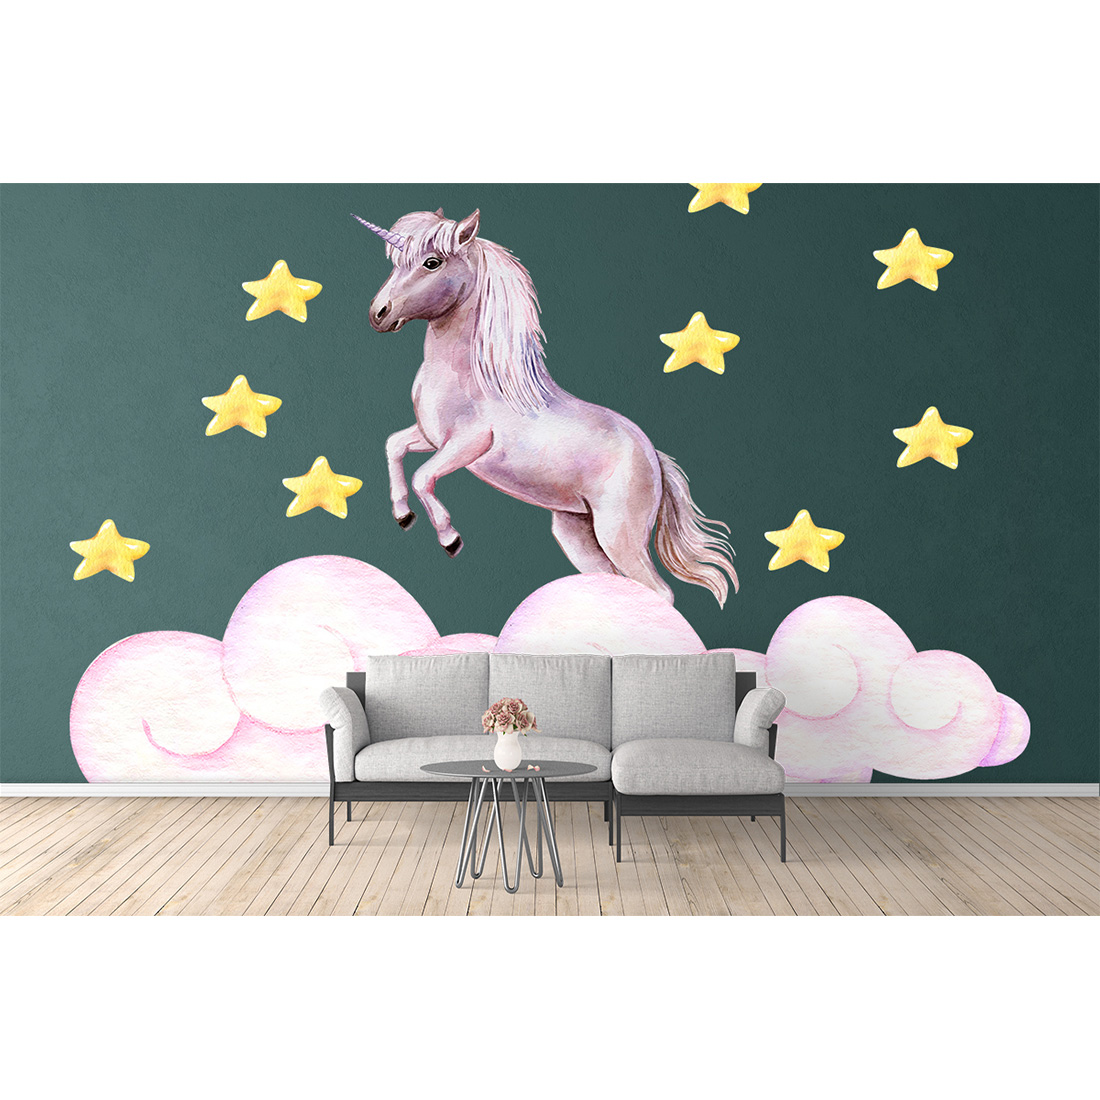 Charming picture of a unicorn on the wall